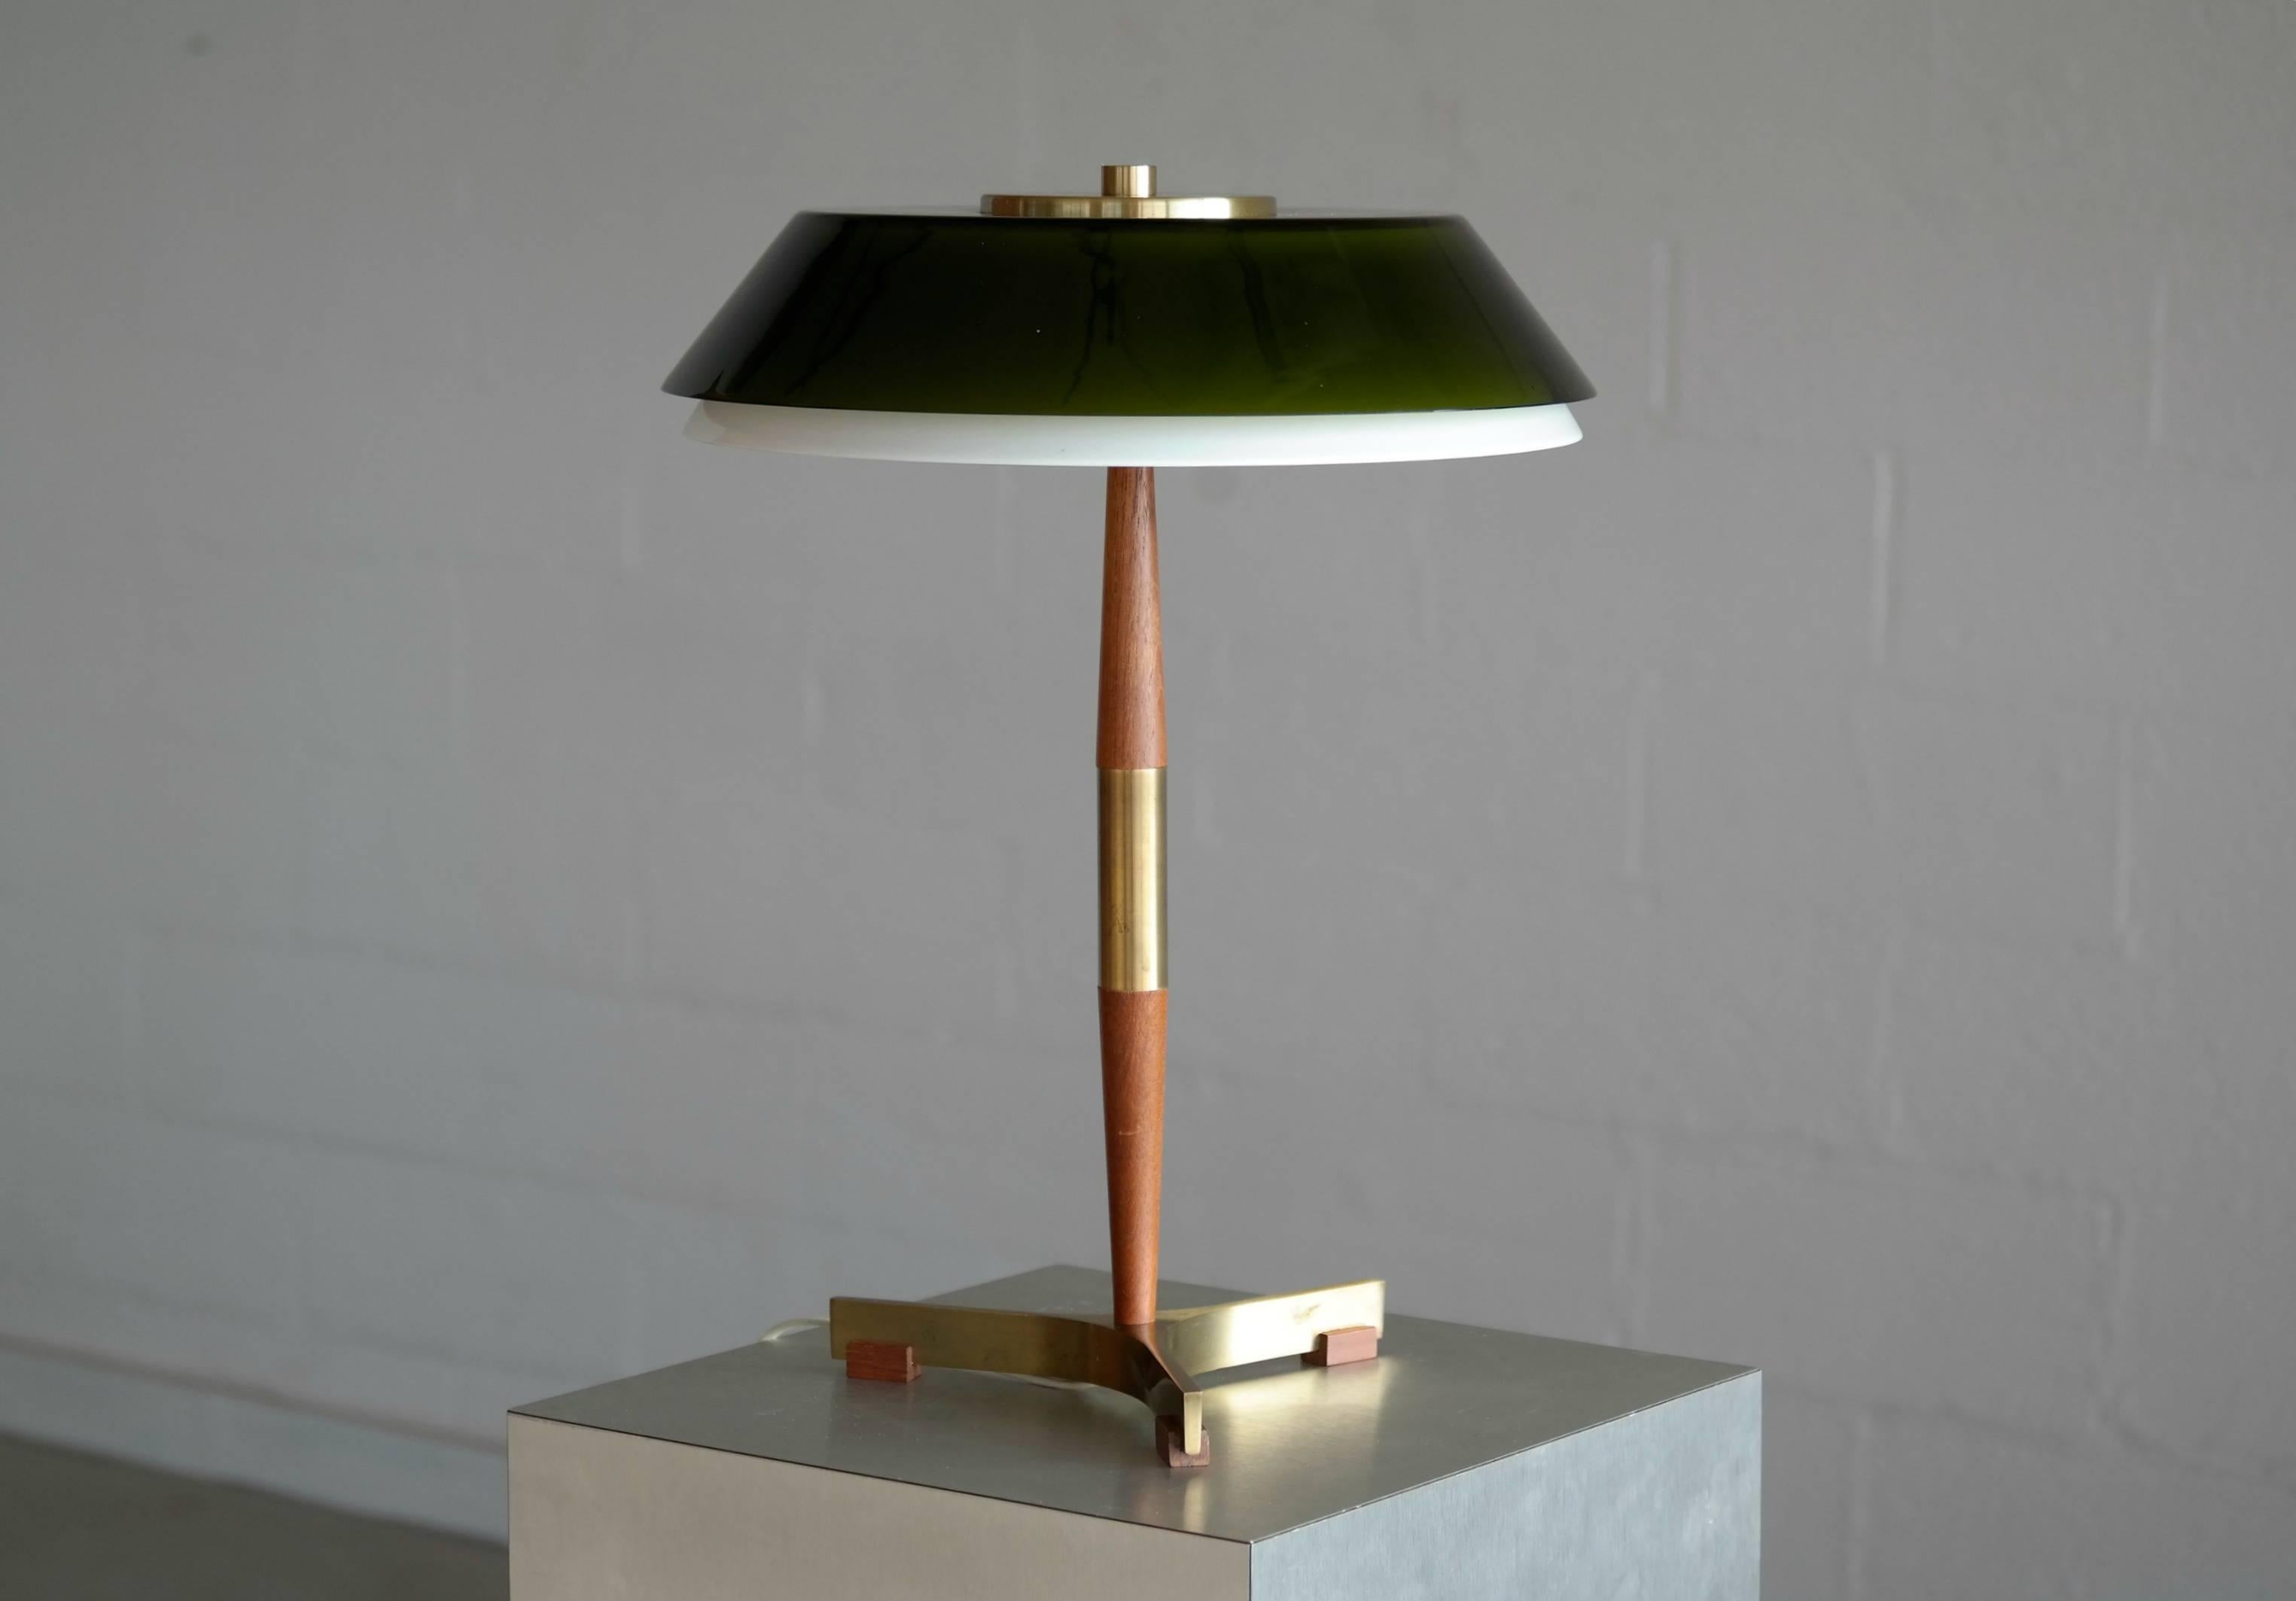 Iconic table Lamp by Jo Hammerborg model president in teak and brass with glass shades made by Fog & Mørup, Denmark. This model with a two-tier shade in glass is quite rare and few have survived with the glass intact.